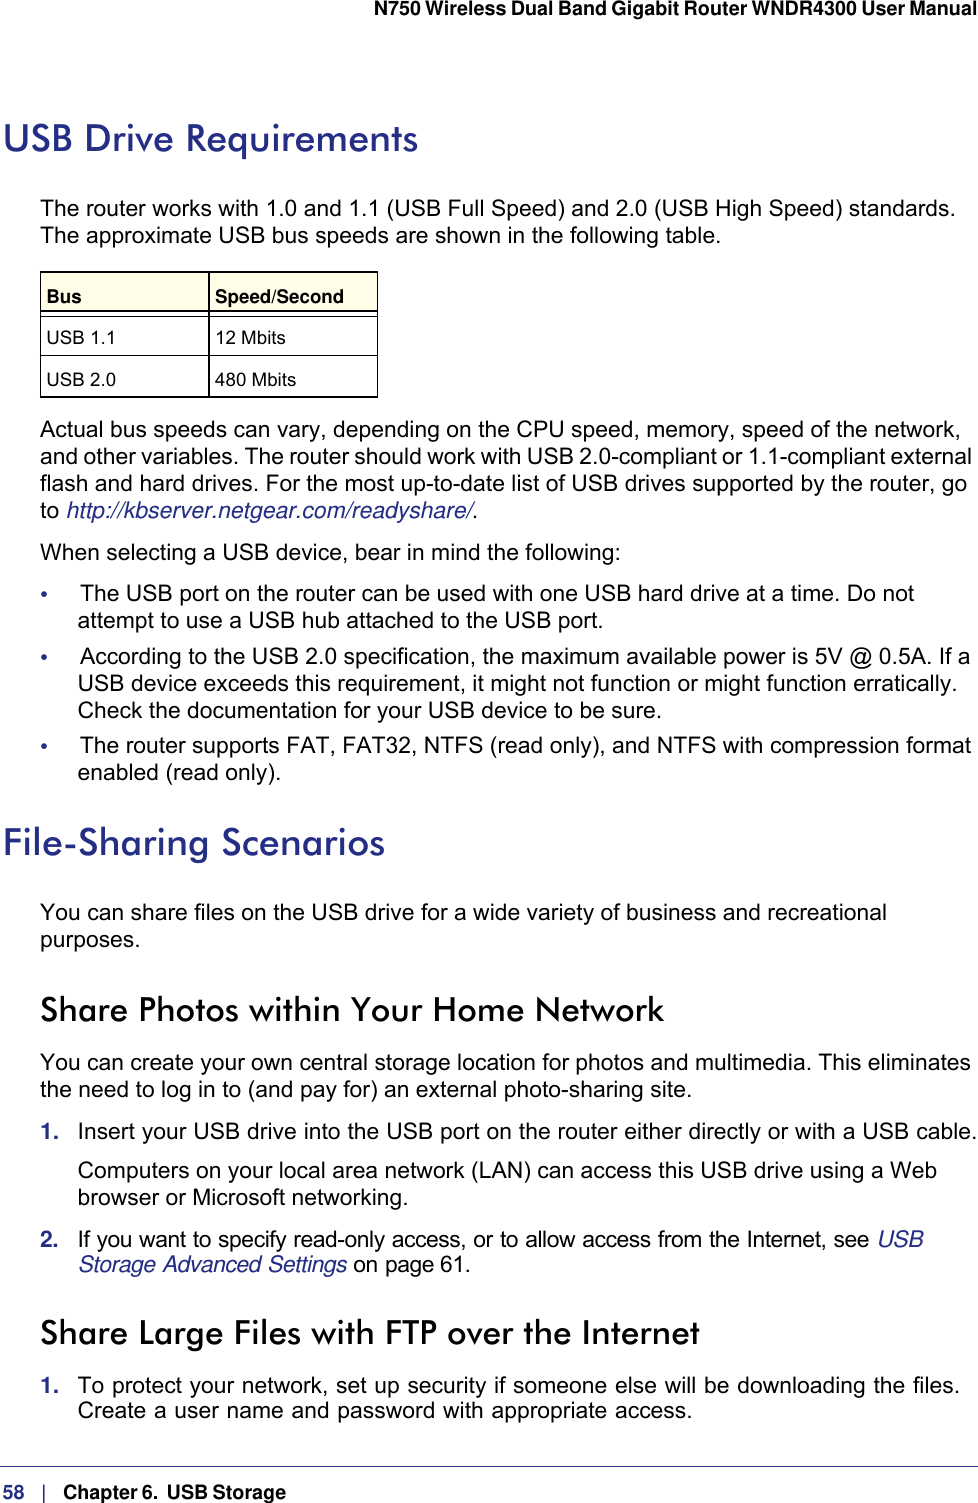 58   |   Chapter 6.  USB Storage  N750 Wireless Dual Band Gigabit Router WNDR4300 User Manual USB Drive RequirementsThe router works with 1.0 and 1.1 (USB Full Speed) and 2.0 (USB High Speed) standards. The approximate USB bus speeds are shown in the following table.Bus Speed/SecondUSB 1.1 12 MbitsUSB 2.0 480 MbitsActual bus speeds can vary, depending on the CPU speed, memory, speed of the network, and other variables. The router should work with USB 2.0-compliant or 1.1-compliant external flash and hard drives. For the most up-to-date list of USB drives supported by the router, go to http://kbserver.netgear.com/readyshare/.When selecting a USB device, bear in mind the following: •     The USB port on the router can be used with one USB hard drive at a time. Do not attempt to use a USB hub attached to the USB port.•     According to the USB 2.0 specification, the maximum available power is 5V @ 0.5A. If a USB device exceeds this requirement, it might not function or might function erratically. Check the documentation for your USB device to be sure.•     The router supports FAT, FAT32, NTFS (read only), and NTFS with compression format enabled (read only). File-Sharing ScenariosYou can share files on the USB drive for a wide variety of business and recreational purposes. Share Photos within Your Home NetworkYou can create your own central storage location for photos and multimedia. This eliminates the need to log in to (and pay for) an external photo-sharing site. 1.  Insert your USB drive into the USB port on the router either directly or with a USB cable.Computers on your local area network (LAN) can access this USB drive using a Web browser or Microsoft networking.2.  If you want to specify read-only access, or to allow access from the Internet, see USB Storage Advanced Settings on page 61.Share Large Files with FTP over the Internet1.  To protect your network, set up security if someone else will be downloading the files. Create a user name and password with appropriate access.